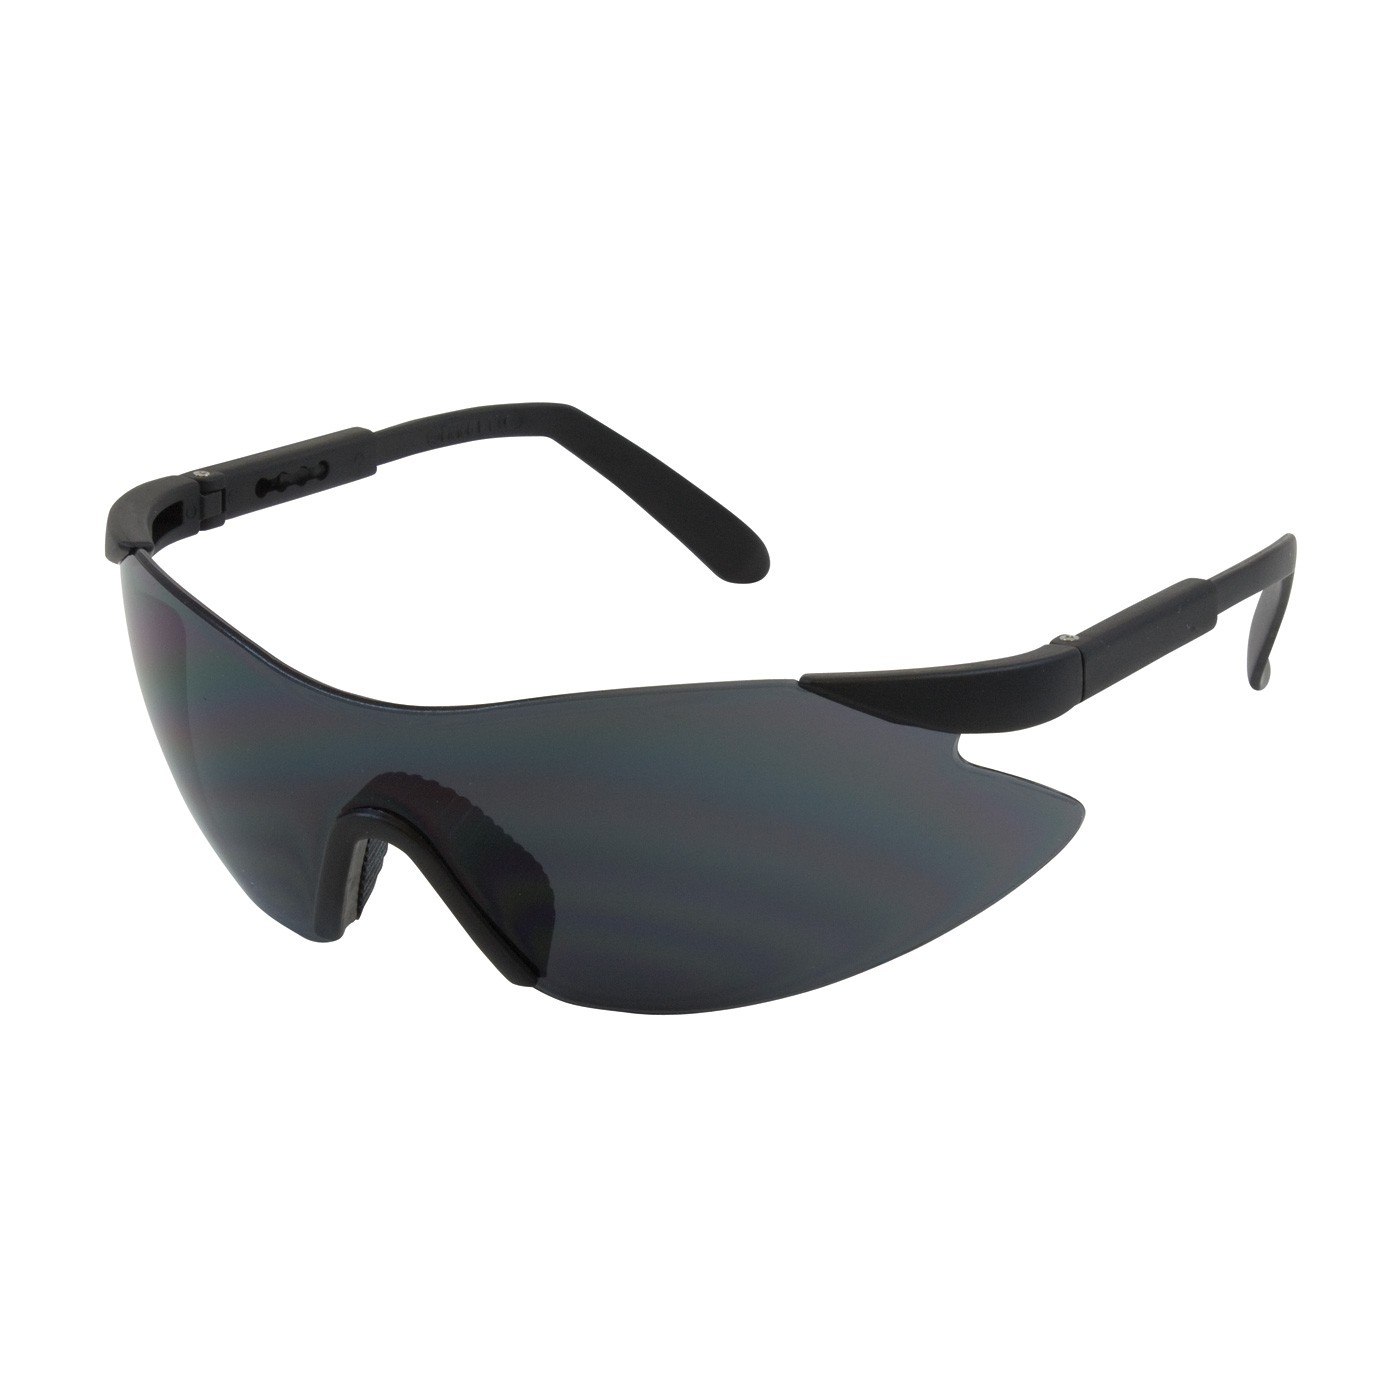 Wilco™ Rimless Safety Glasses with Black Temple, Gray Lens and Anti-Scratch Coating  (#250-92-0001)